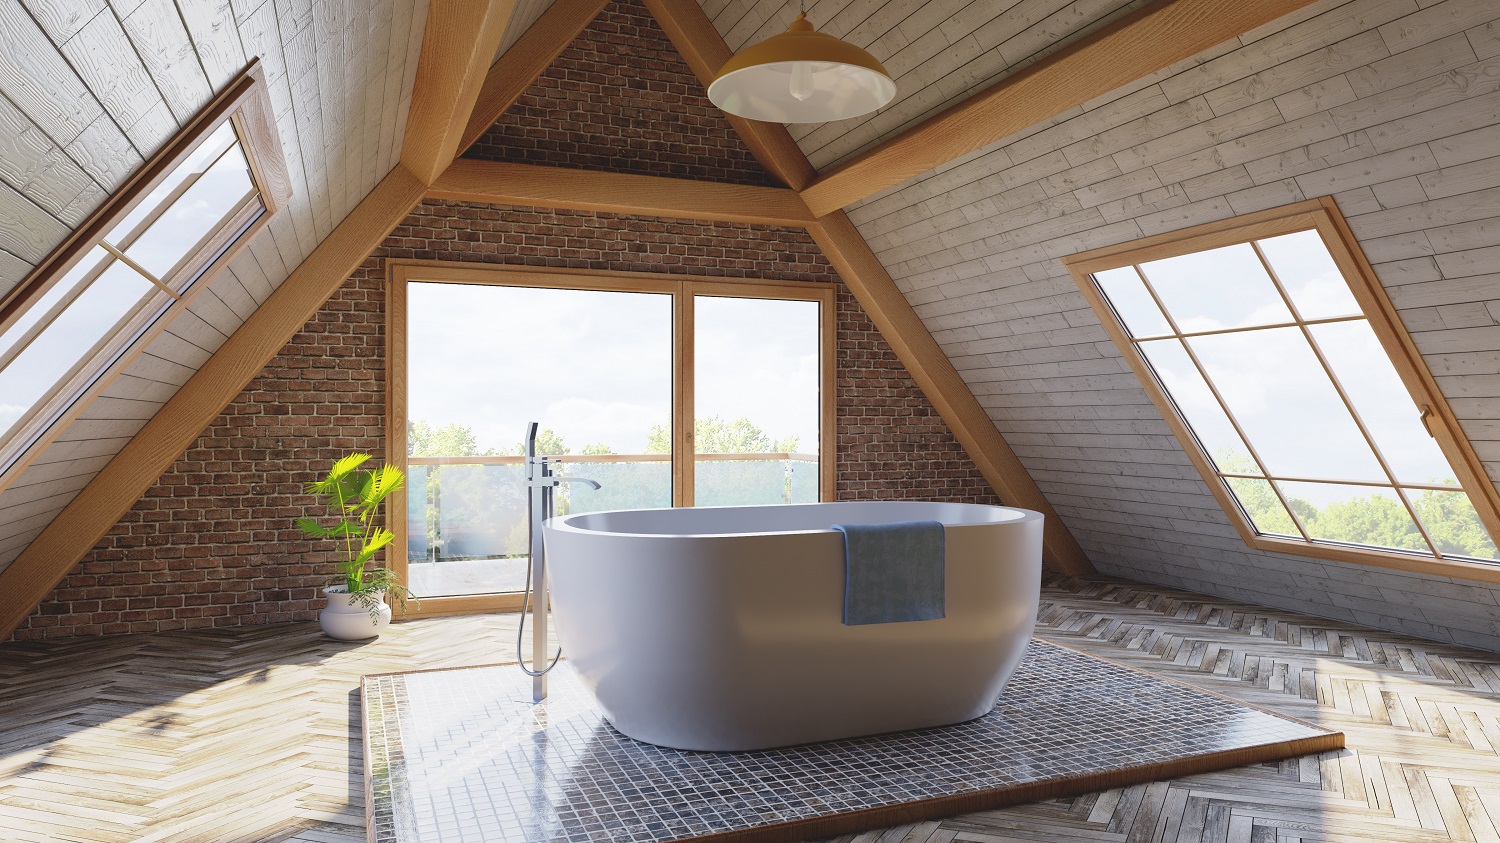 Digital lifestyle image of a large attic bathroom, with wooden floorboards in a chevron pattern, a raised tile platform, a freestanding bath with floorstanding tap and handset shower, large french windows and skylights